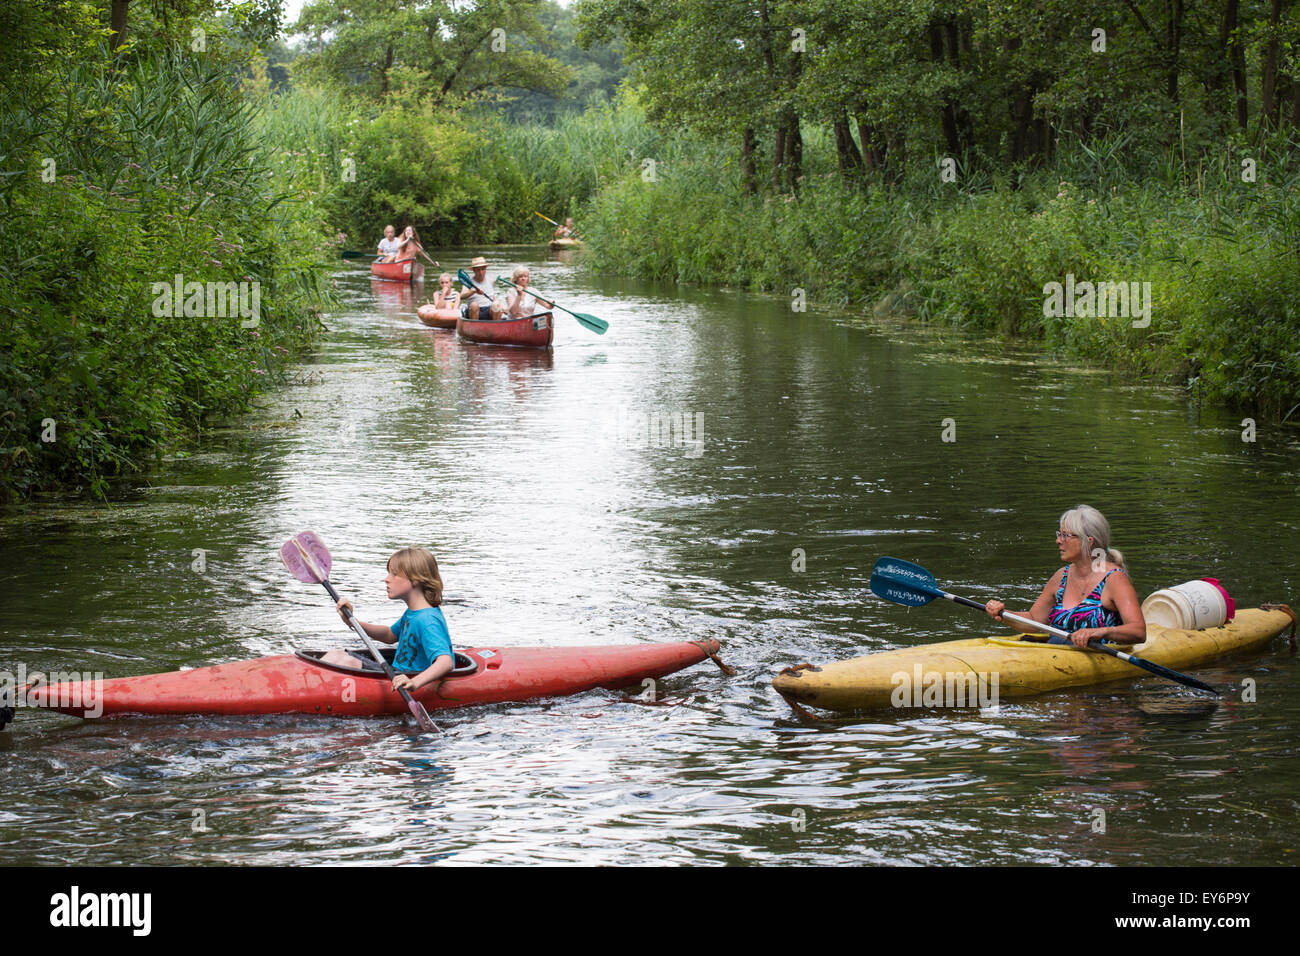 Canoeing and kayaking tourists passing at meandering river the 'Dommel' in the Netherlands, Europe Stock Photo